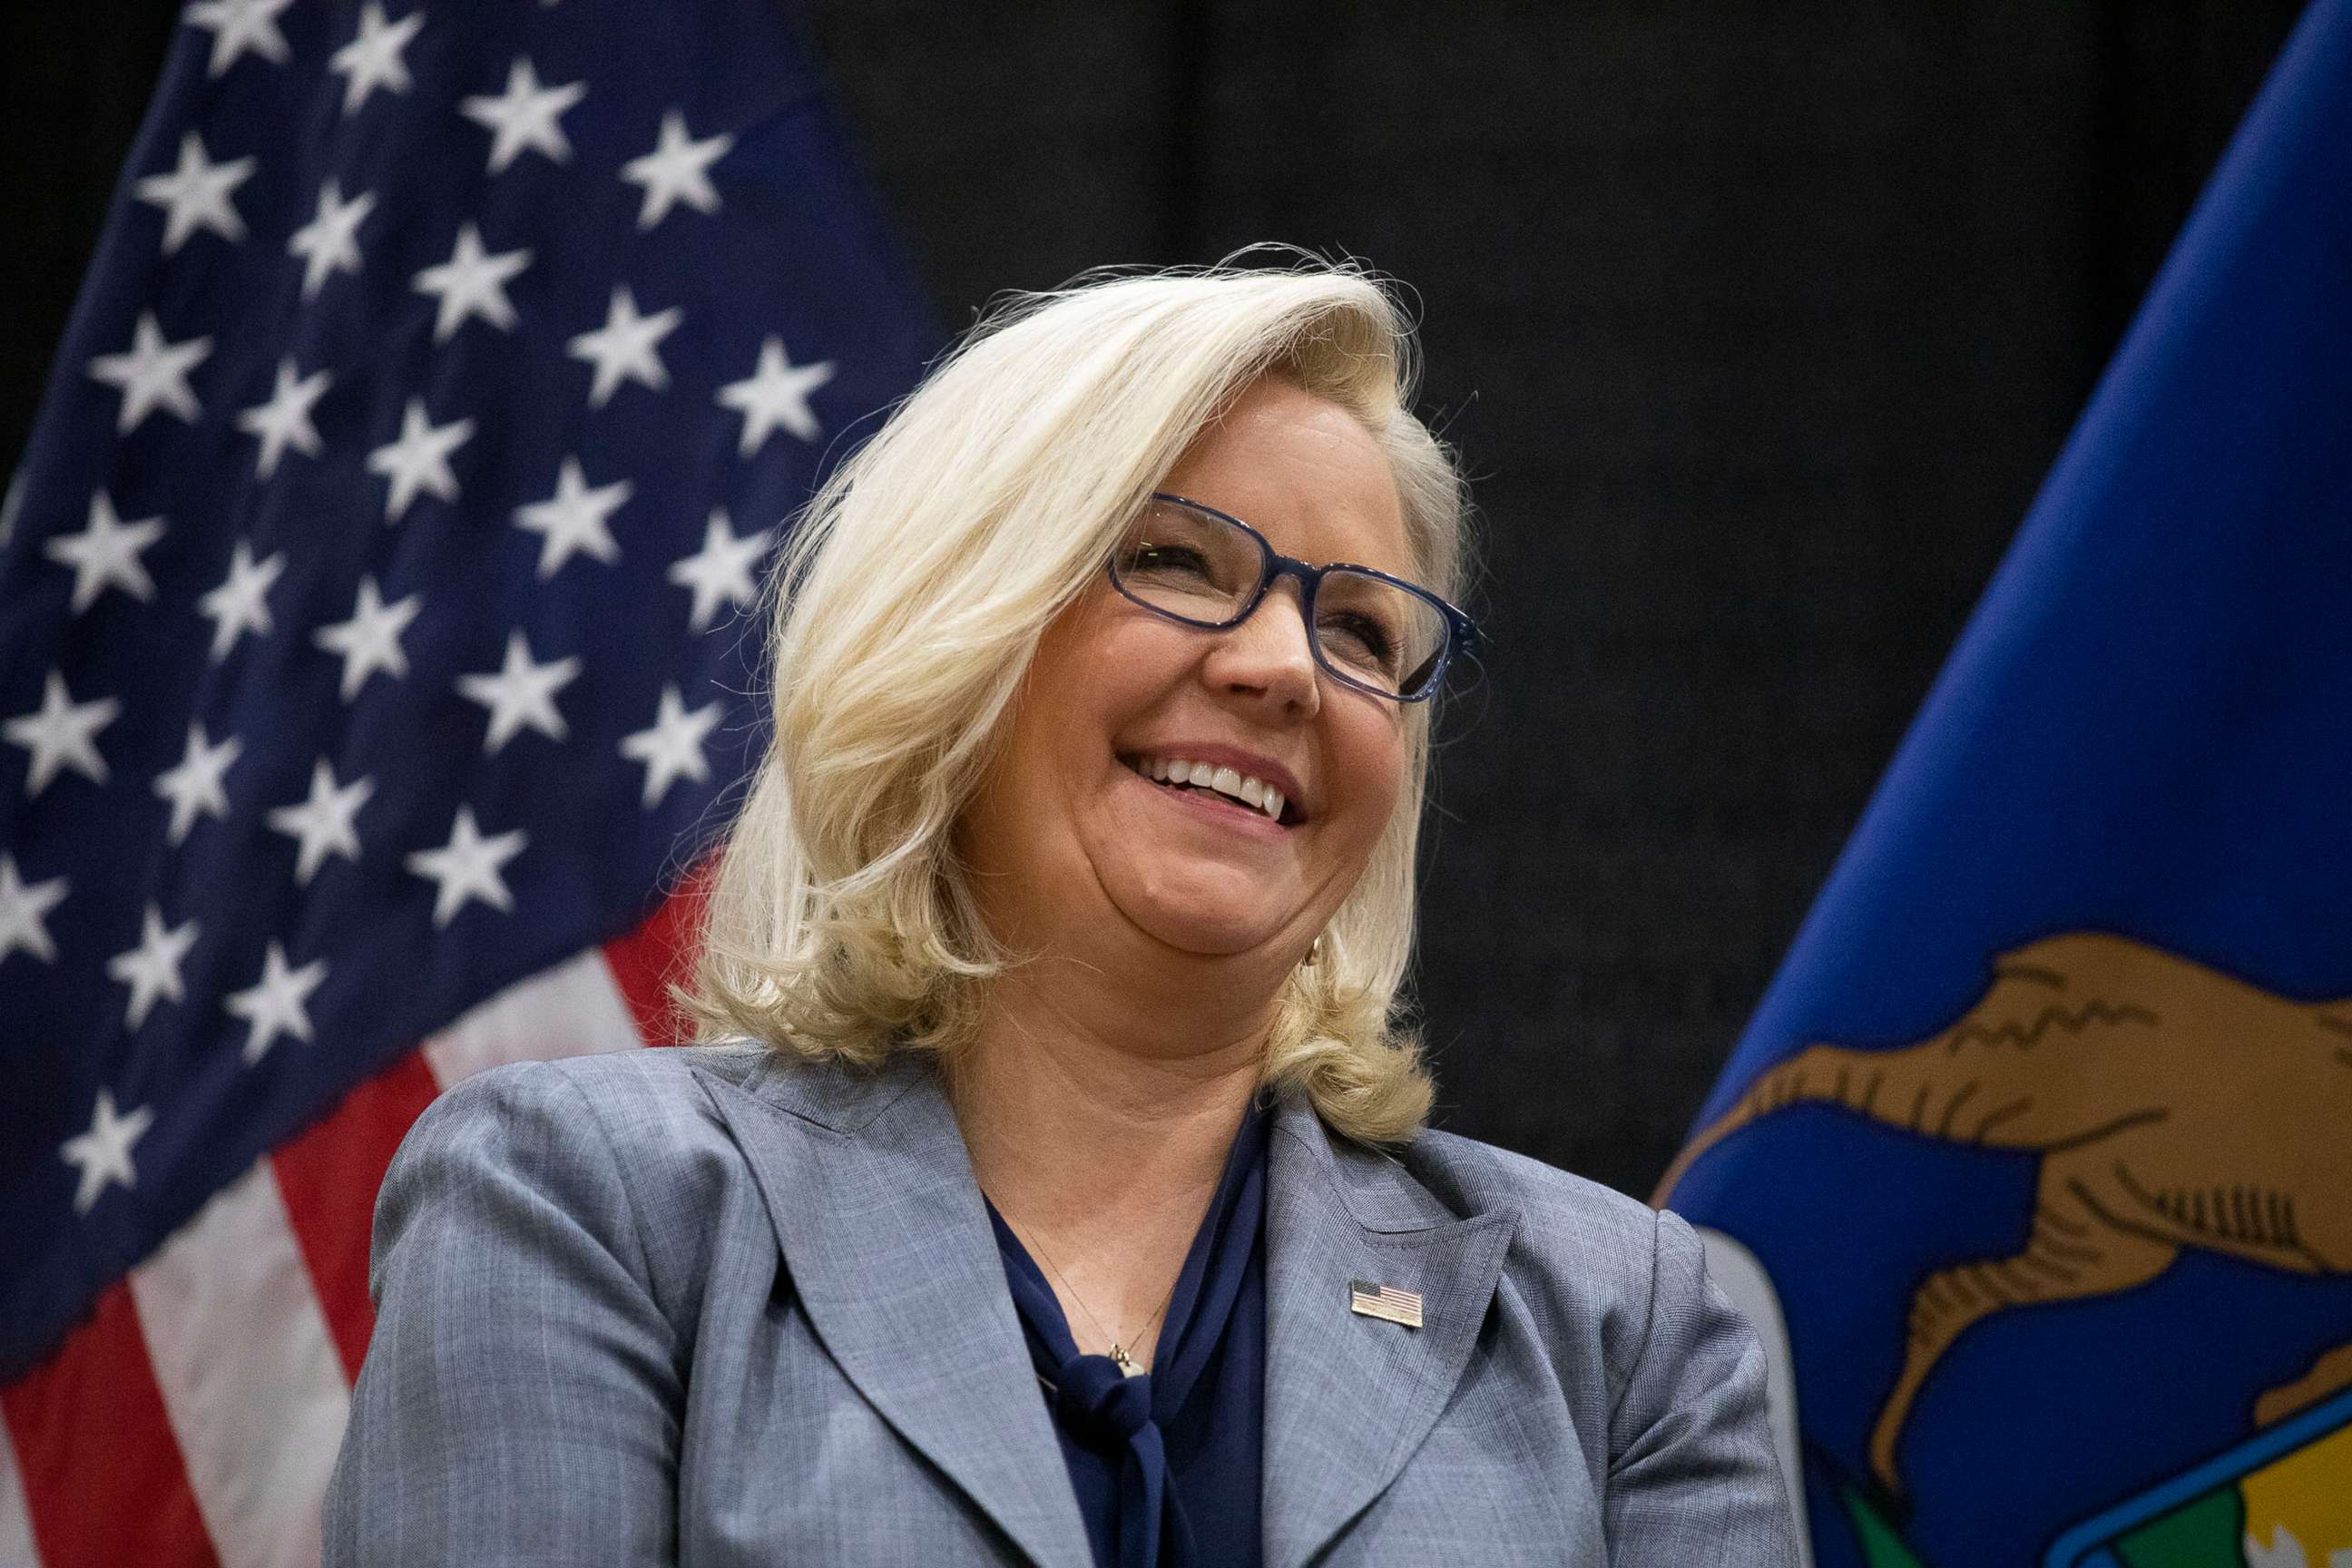 PHOTO: Rep. Liz Cheney campaigns with Democratic Rep. Elissa Slotkin at an Evening for Patriotism and Bipartisanship event on Nov. 1, 2022, in East Lansing, Mich.